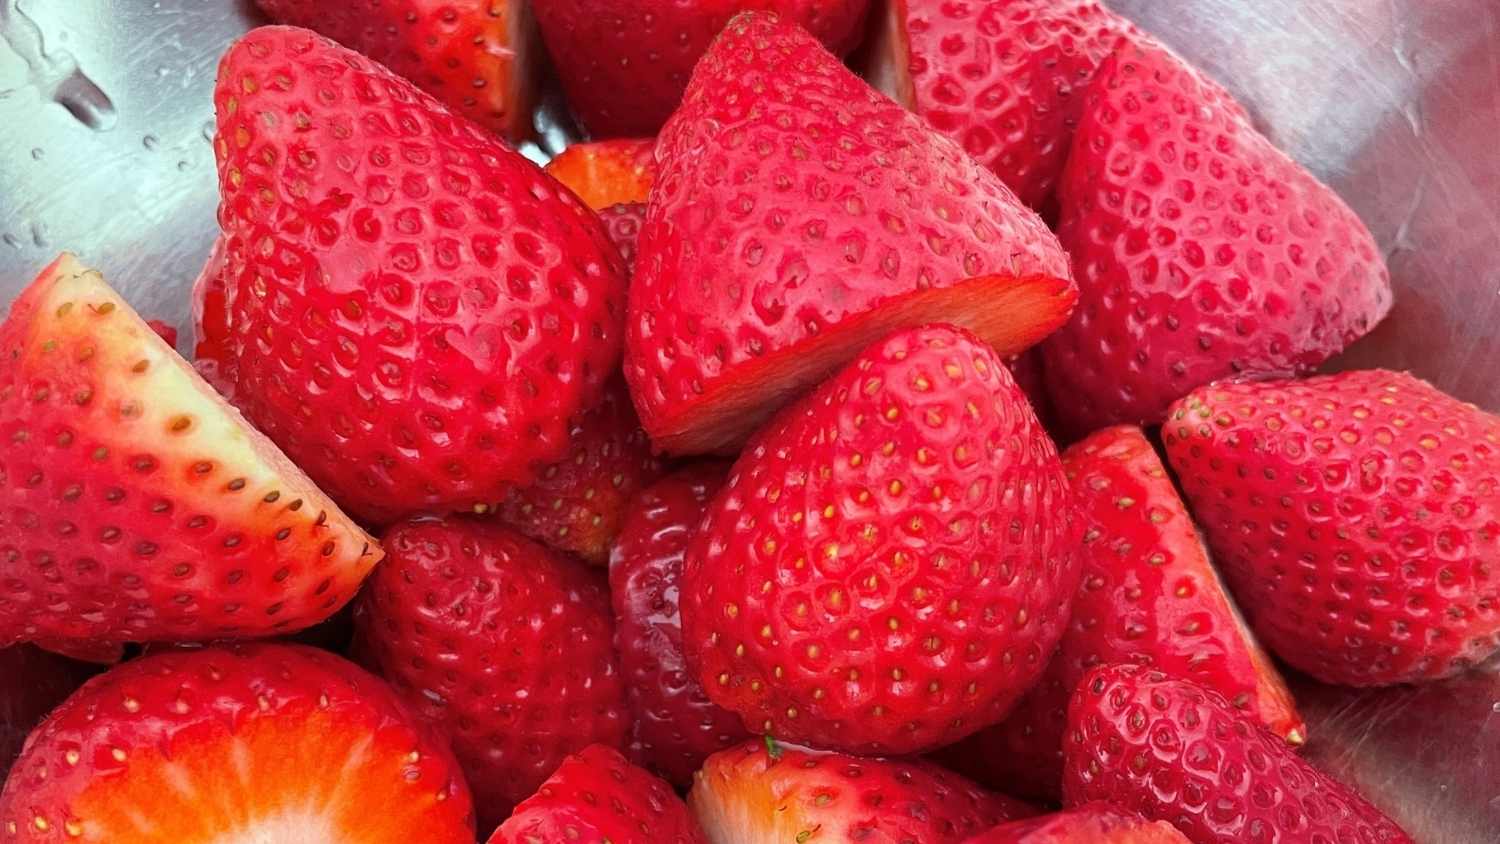 whole fresh strawberries to be dehydrated and freeze-dried for backpacking meals